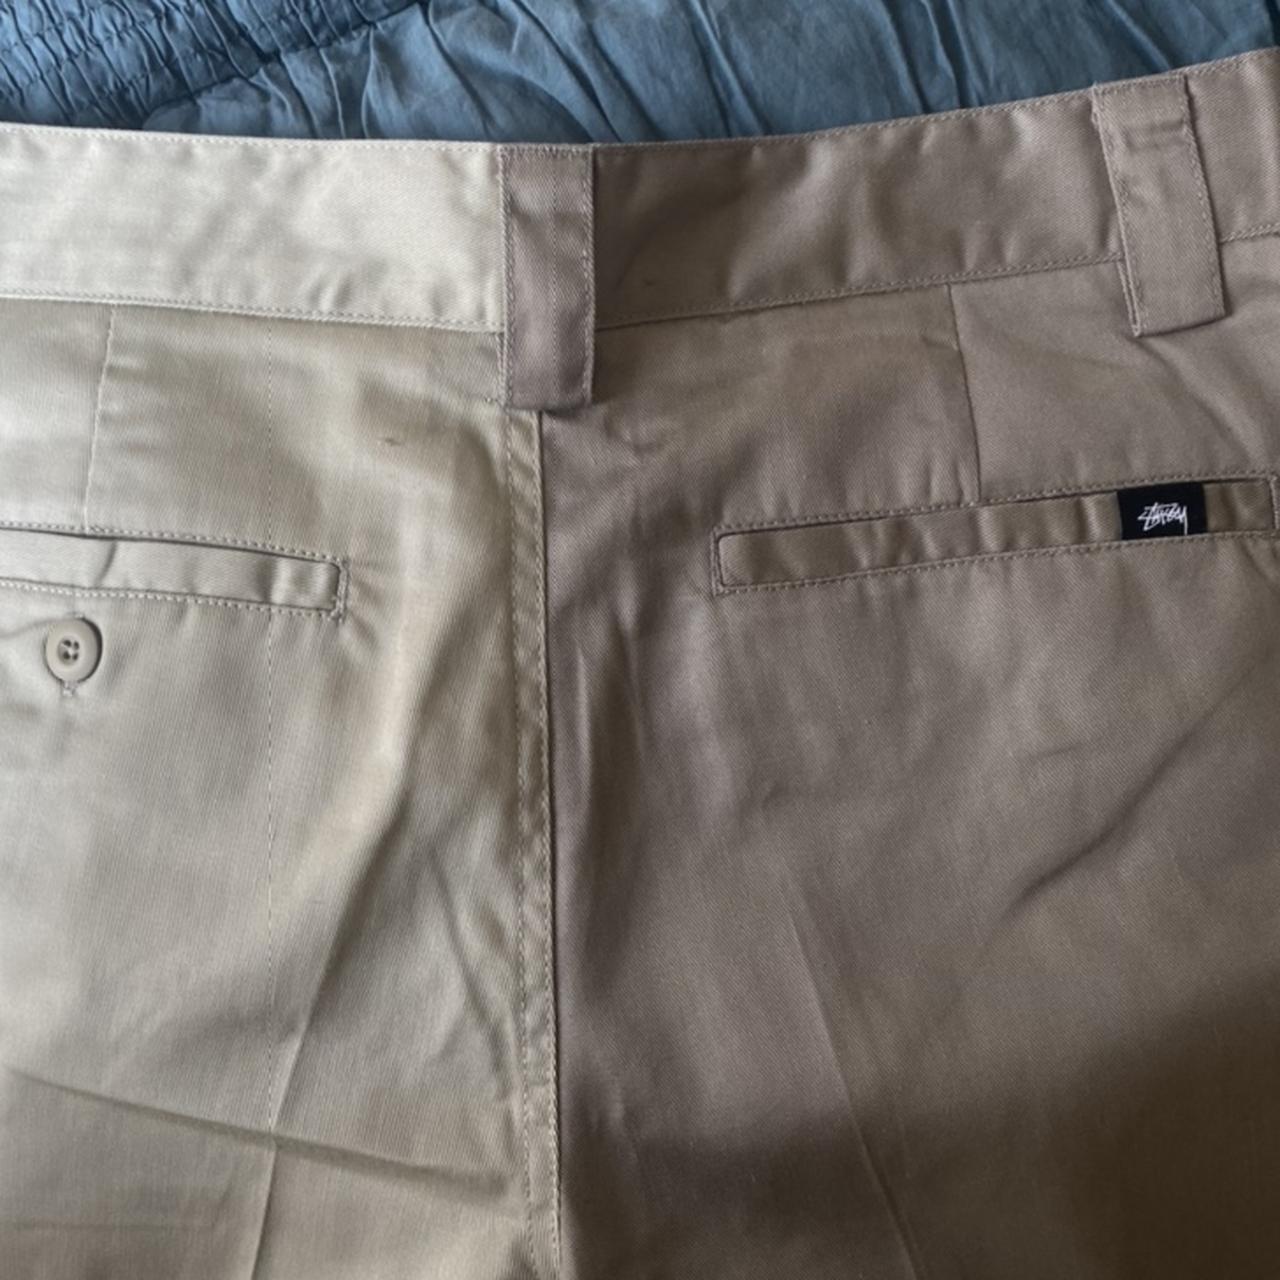 NWT. Stüssy Louise Two Tone Chino Pant - Size 7. - Depop